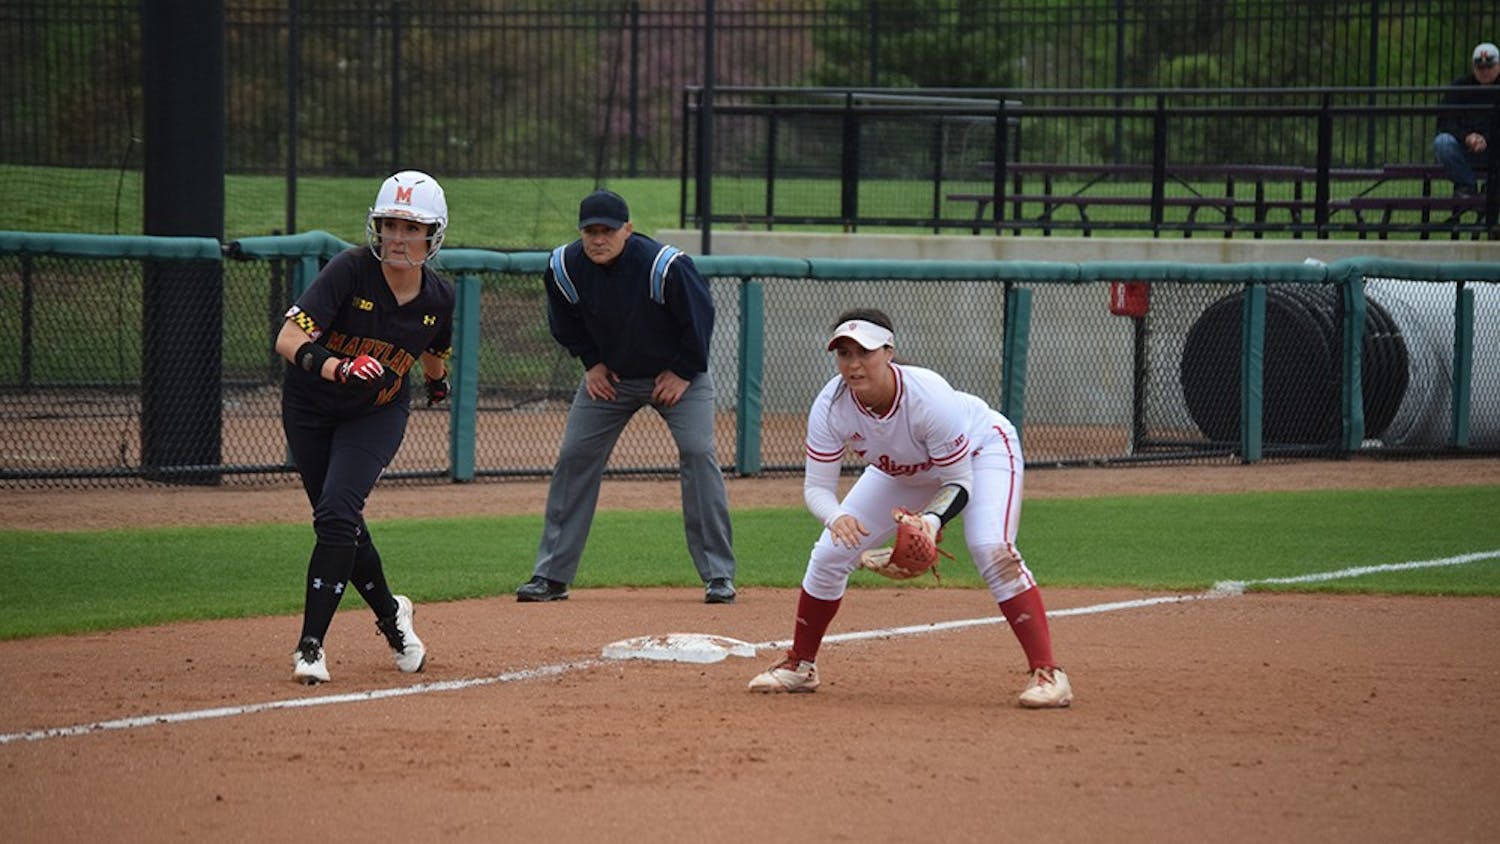 Freshman utility player Katie Lacefield covers the left side of the infield while a Maryland player takes a lead off third base on Friday, April 21, 2017. The Hoosiers defeated the Terrapins in all three games in Bloomington.